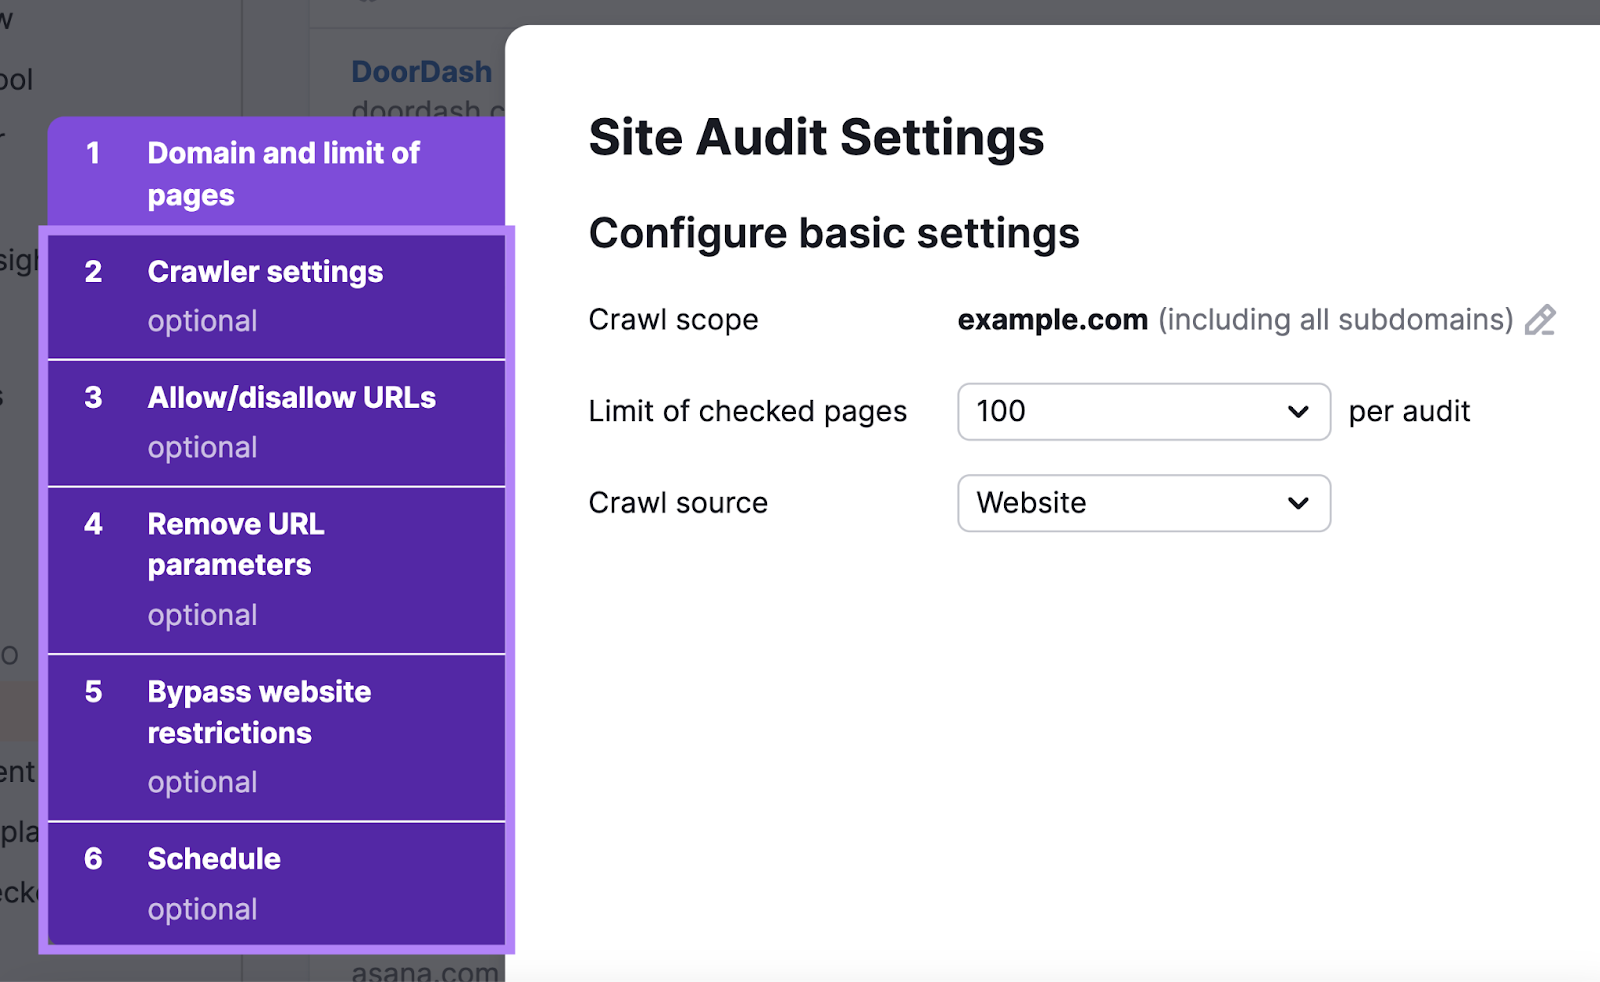 Site Audit Settings tabs highlighted on the left-hand navigation menu